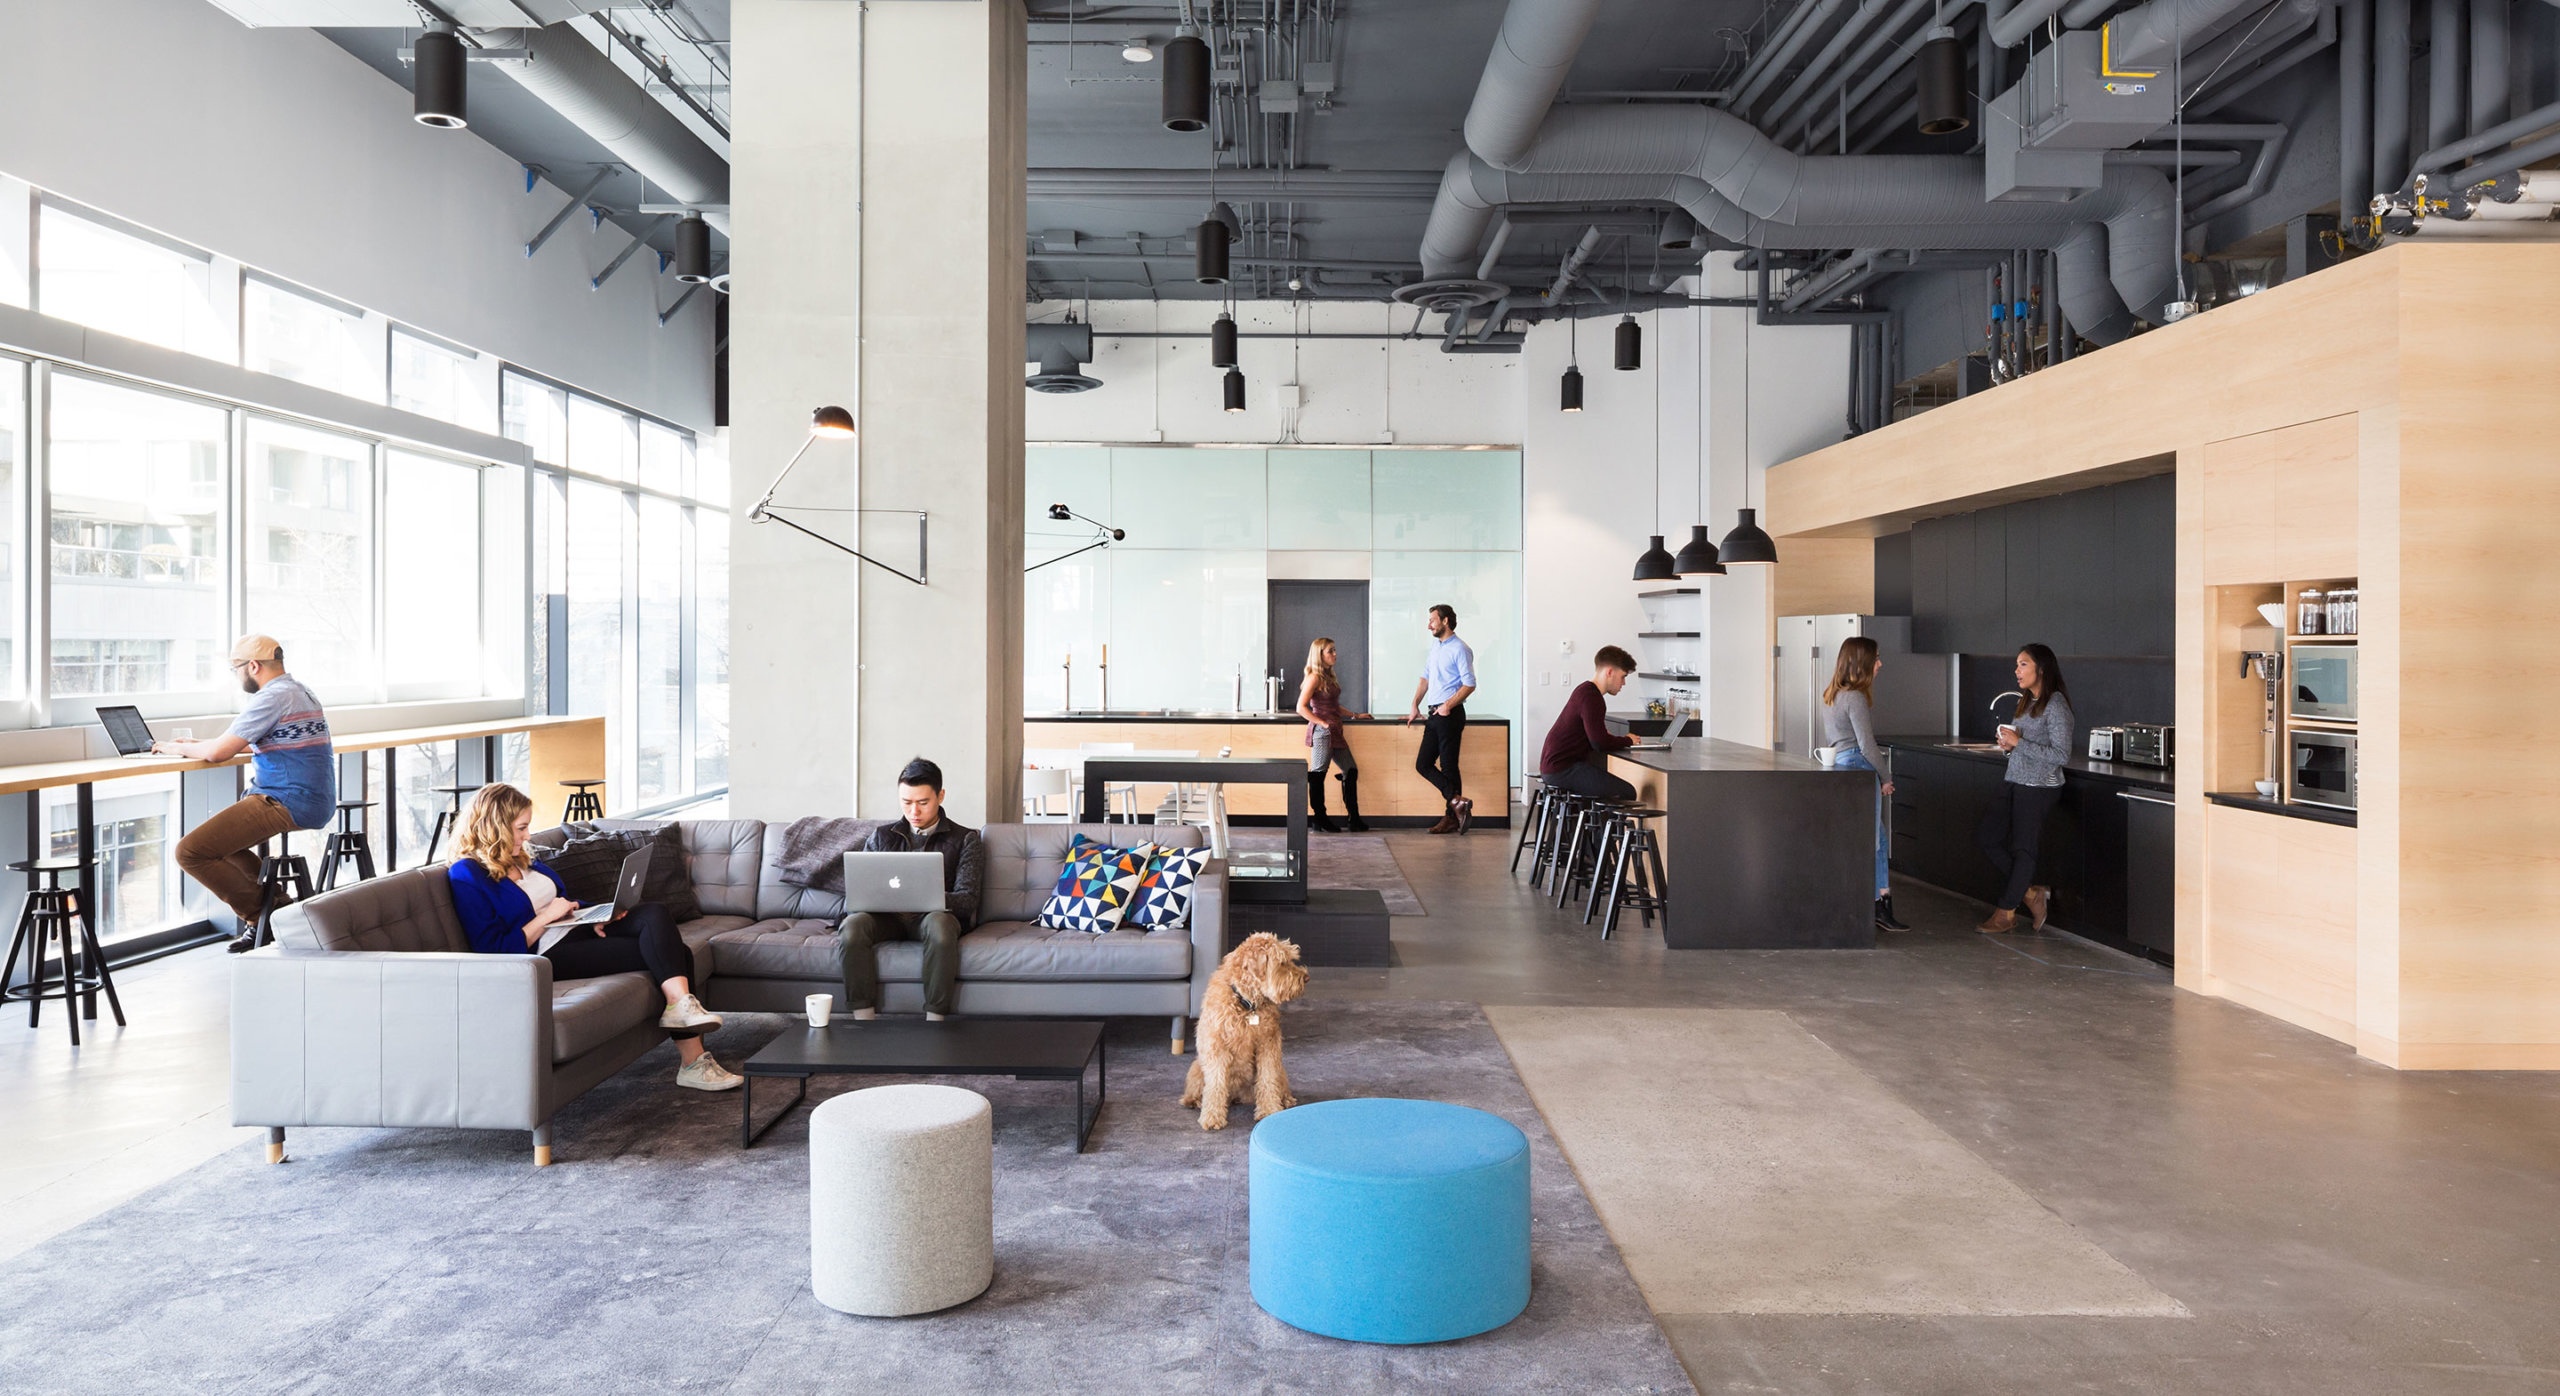 Bench's hard working social space provides for gathering space for social functions, work space during the day and can be configured for all office meetings.